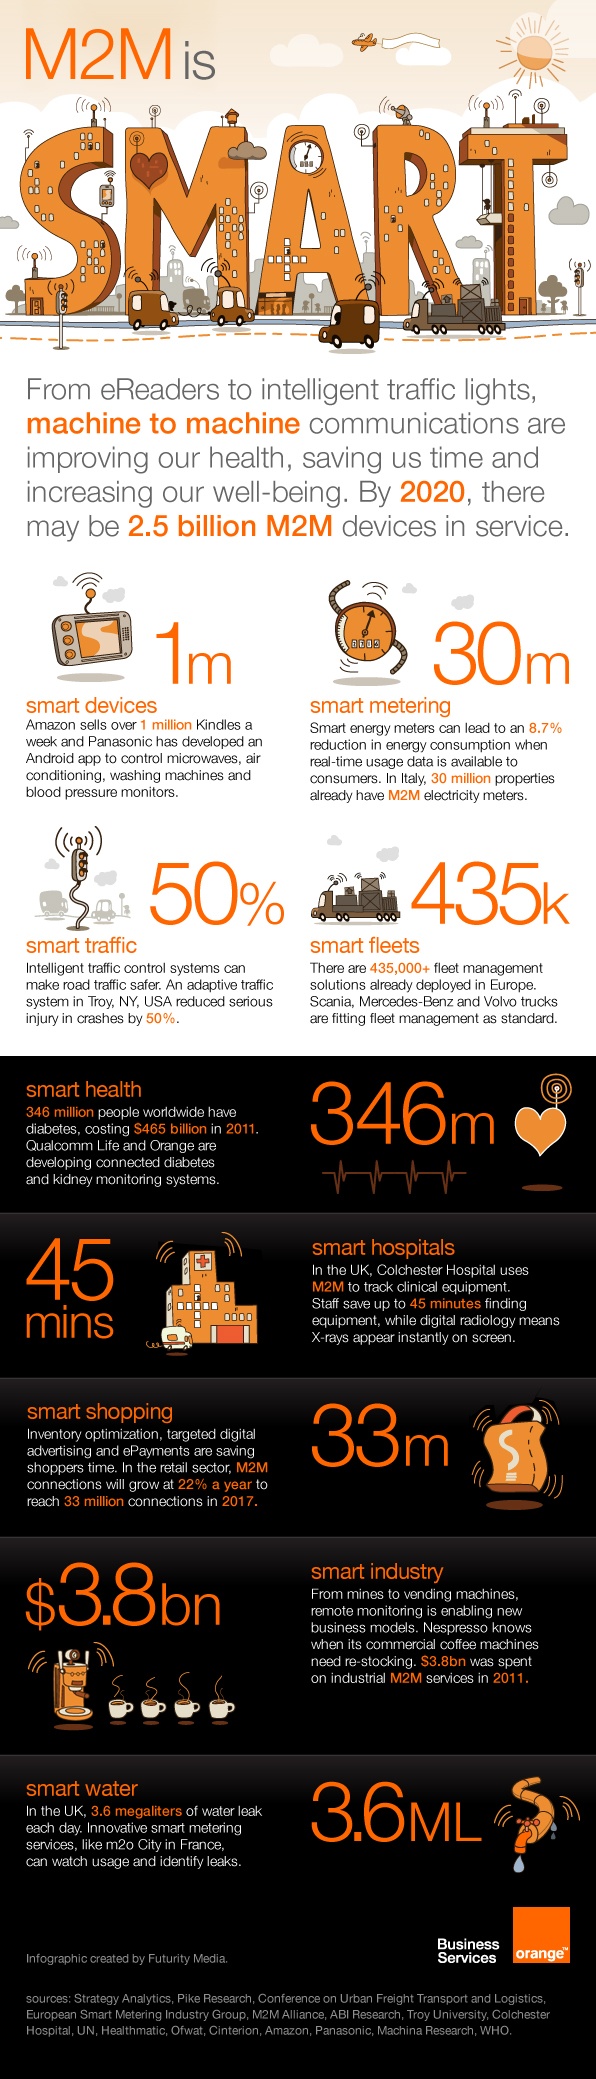 How M2M Data Will Have a Major Impact by 2020 - Infographic